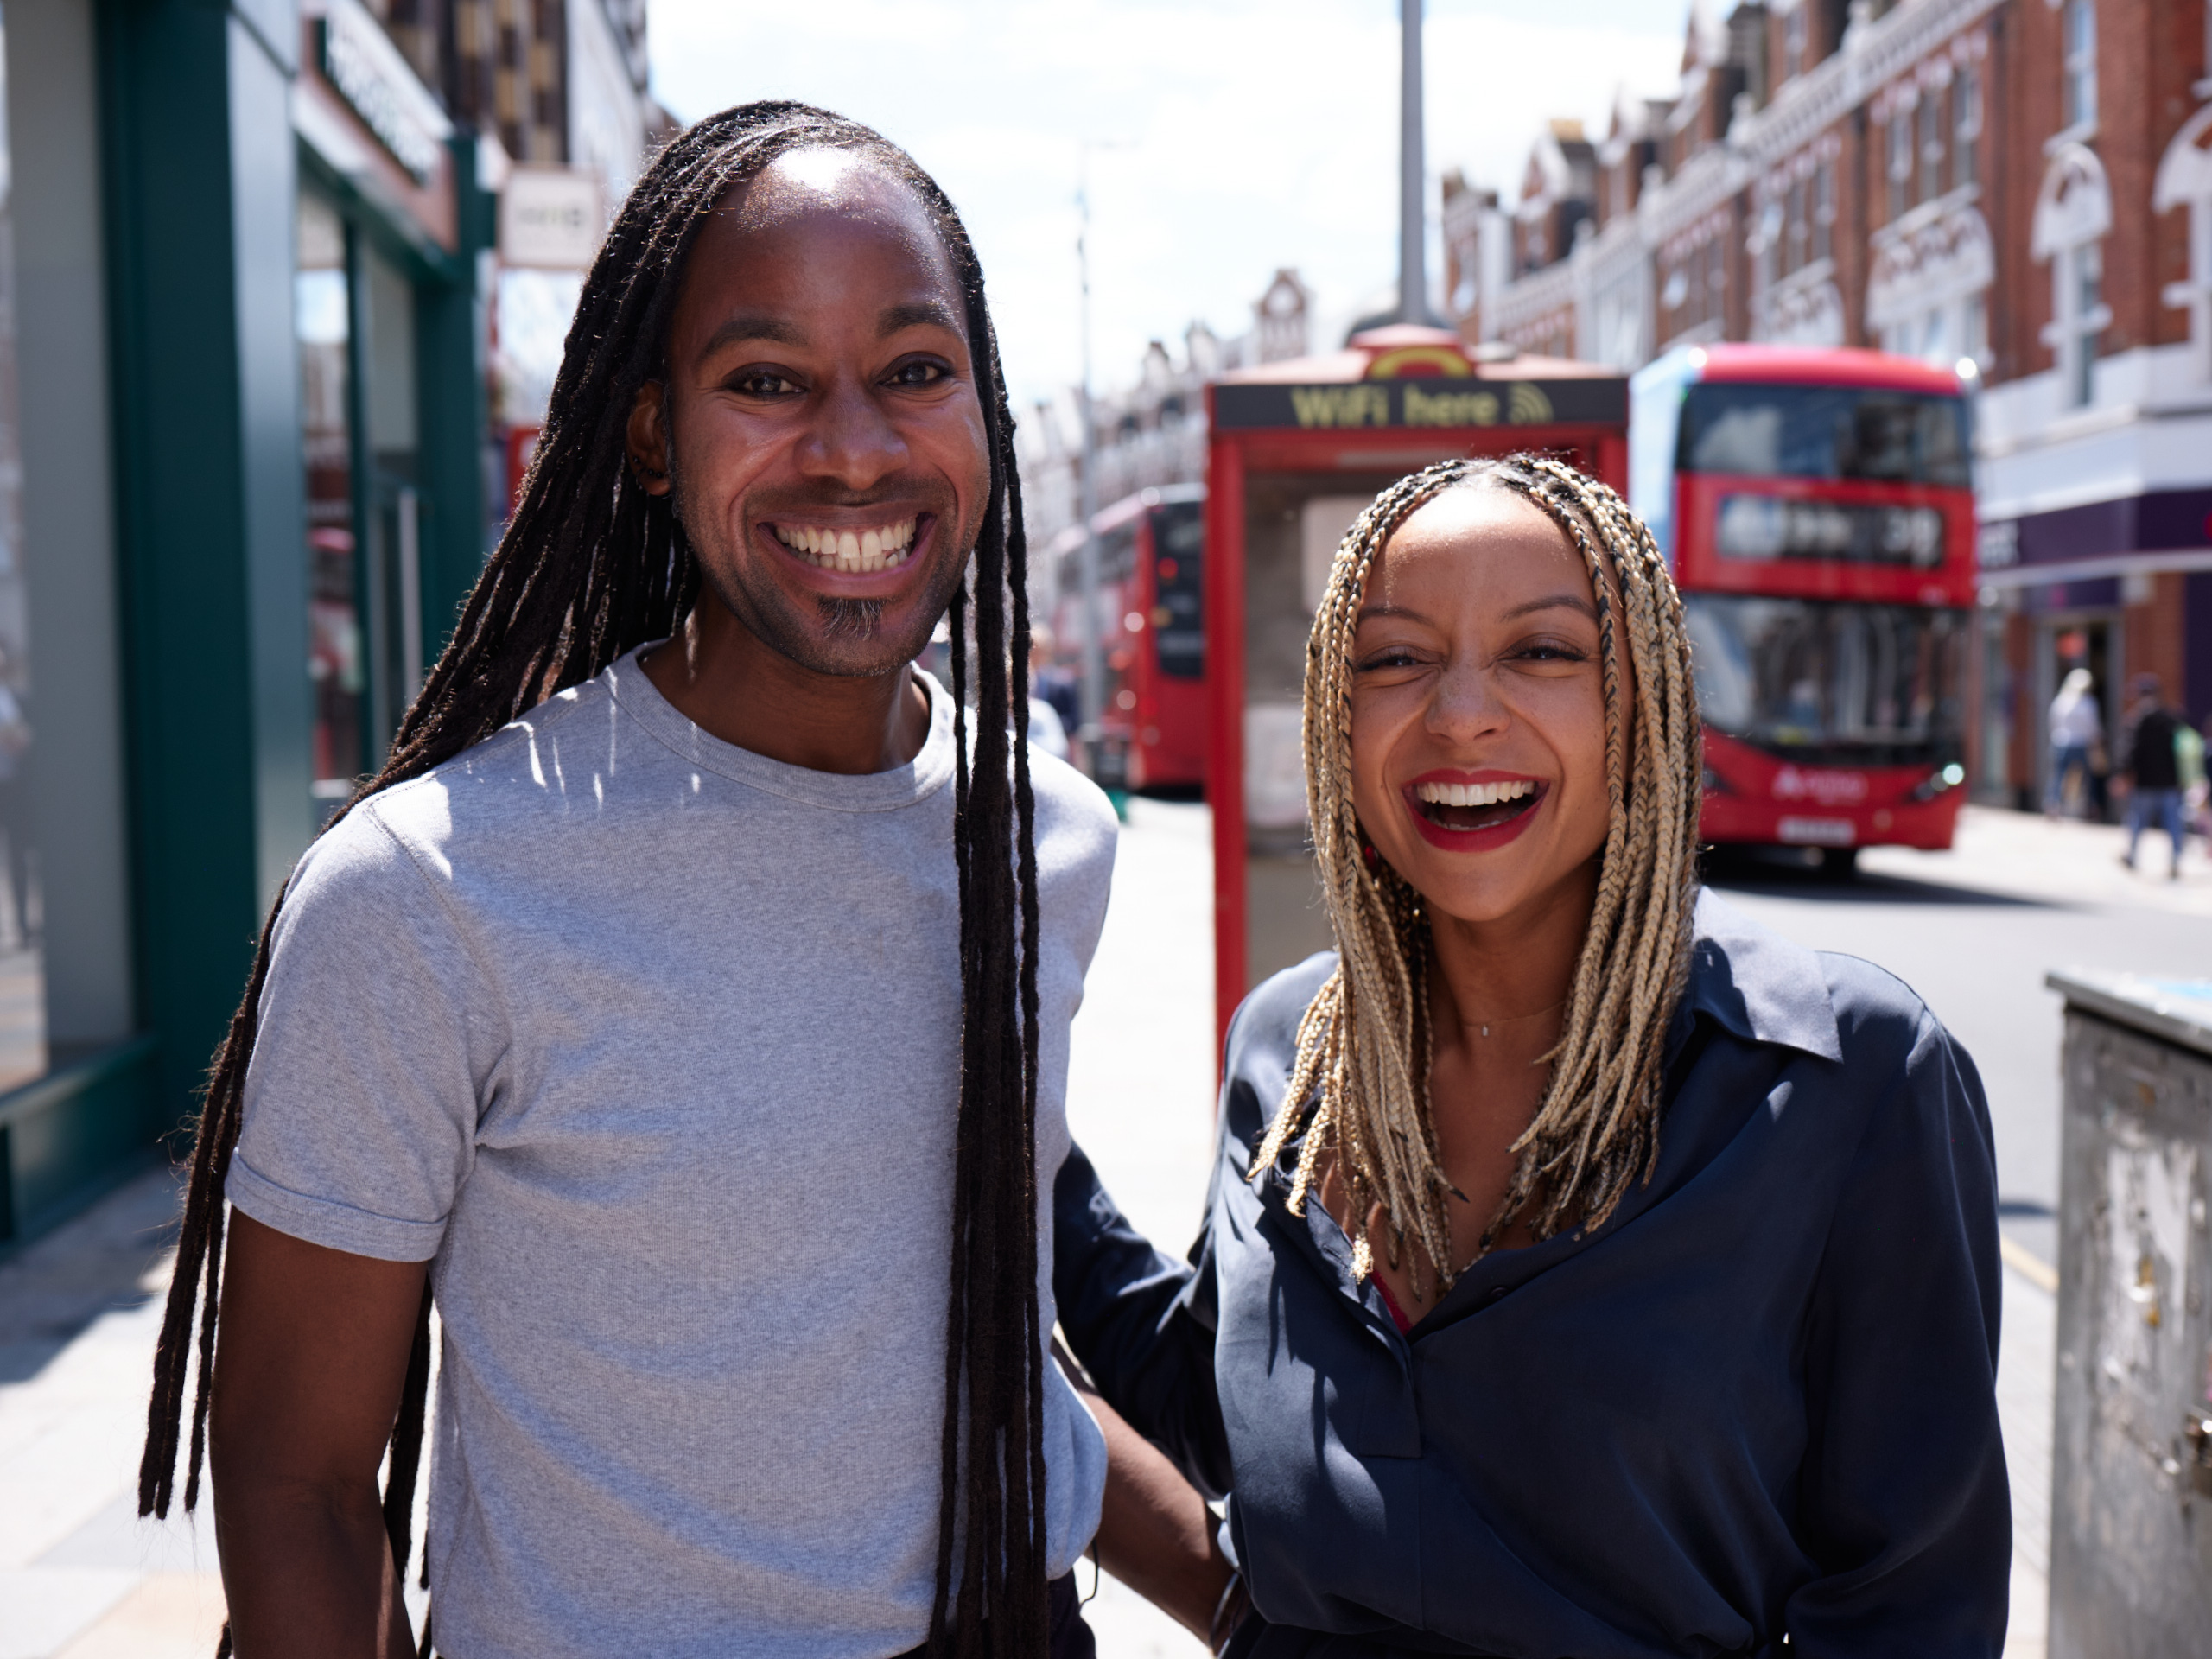 Dr Chantelle Lewis (right) and Professor Jason Arday (left) smile at the camera on a busy street in London.